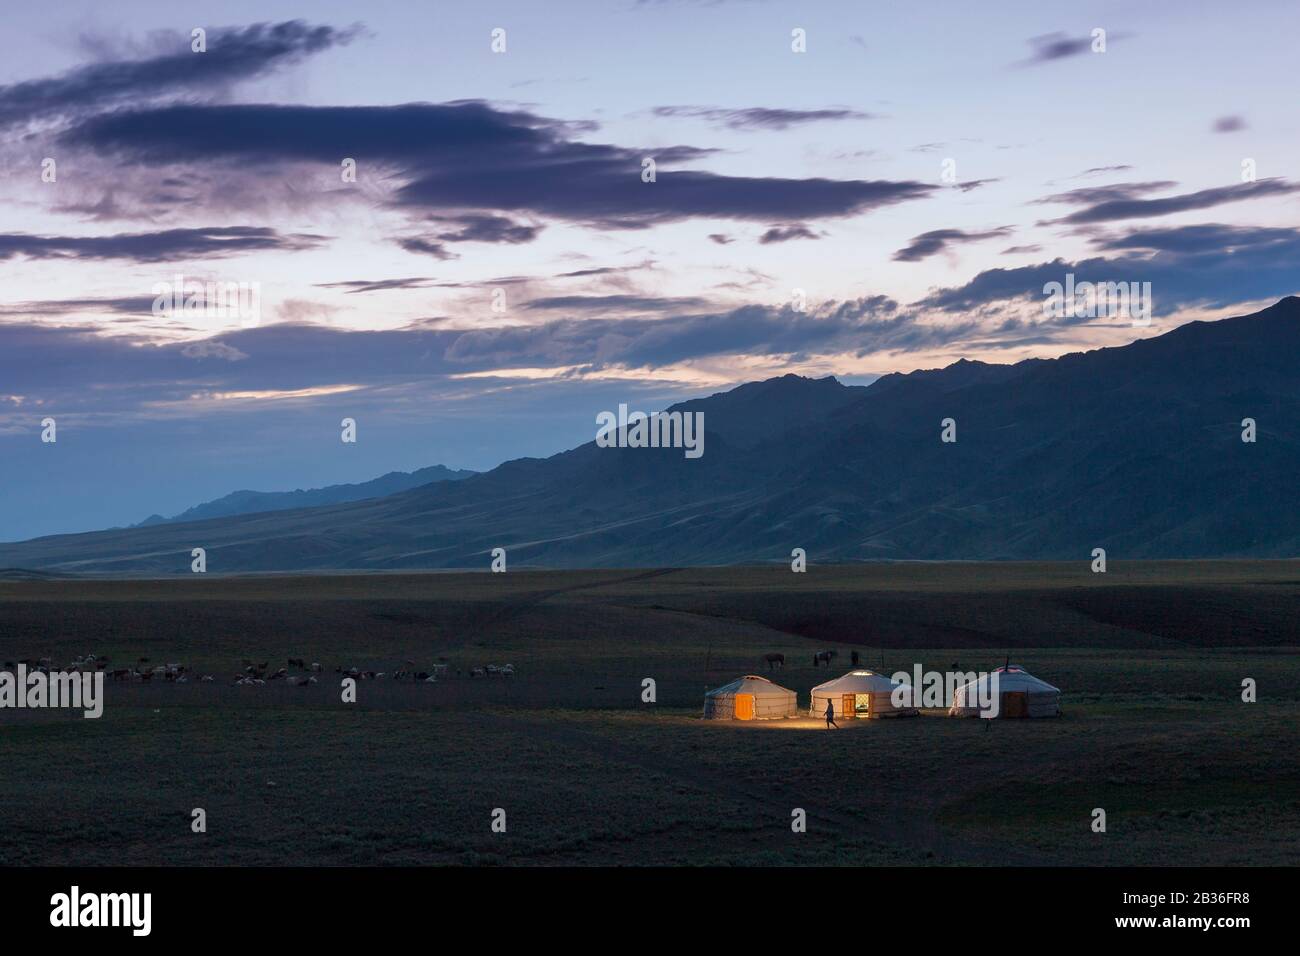 Mongolia, Omnogovi province, near Dalanzadgad, elevated view of a steppe landscape and yurts lit by a tourist's torch Stock Photo